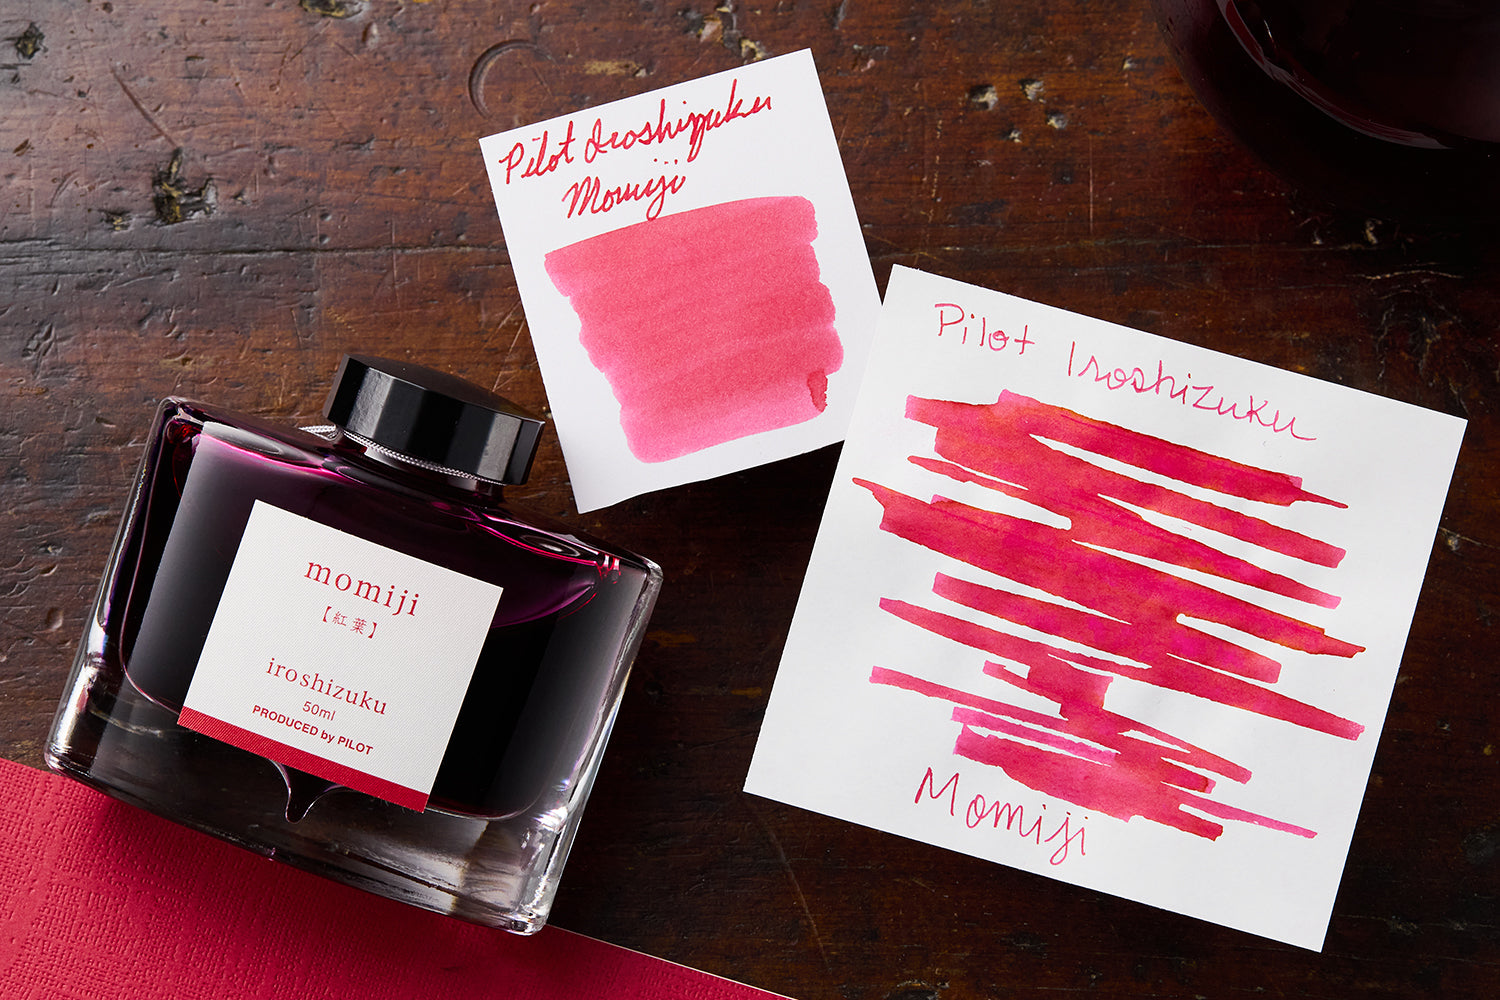 Pilot Iroshizuku Momiji fountain pen ink bottle, and 2 white cards with pink ink swabs on them on wooden background